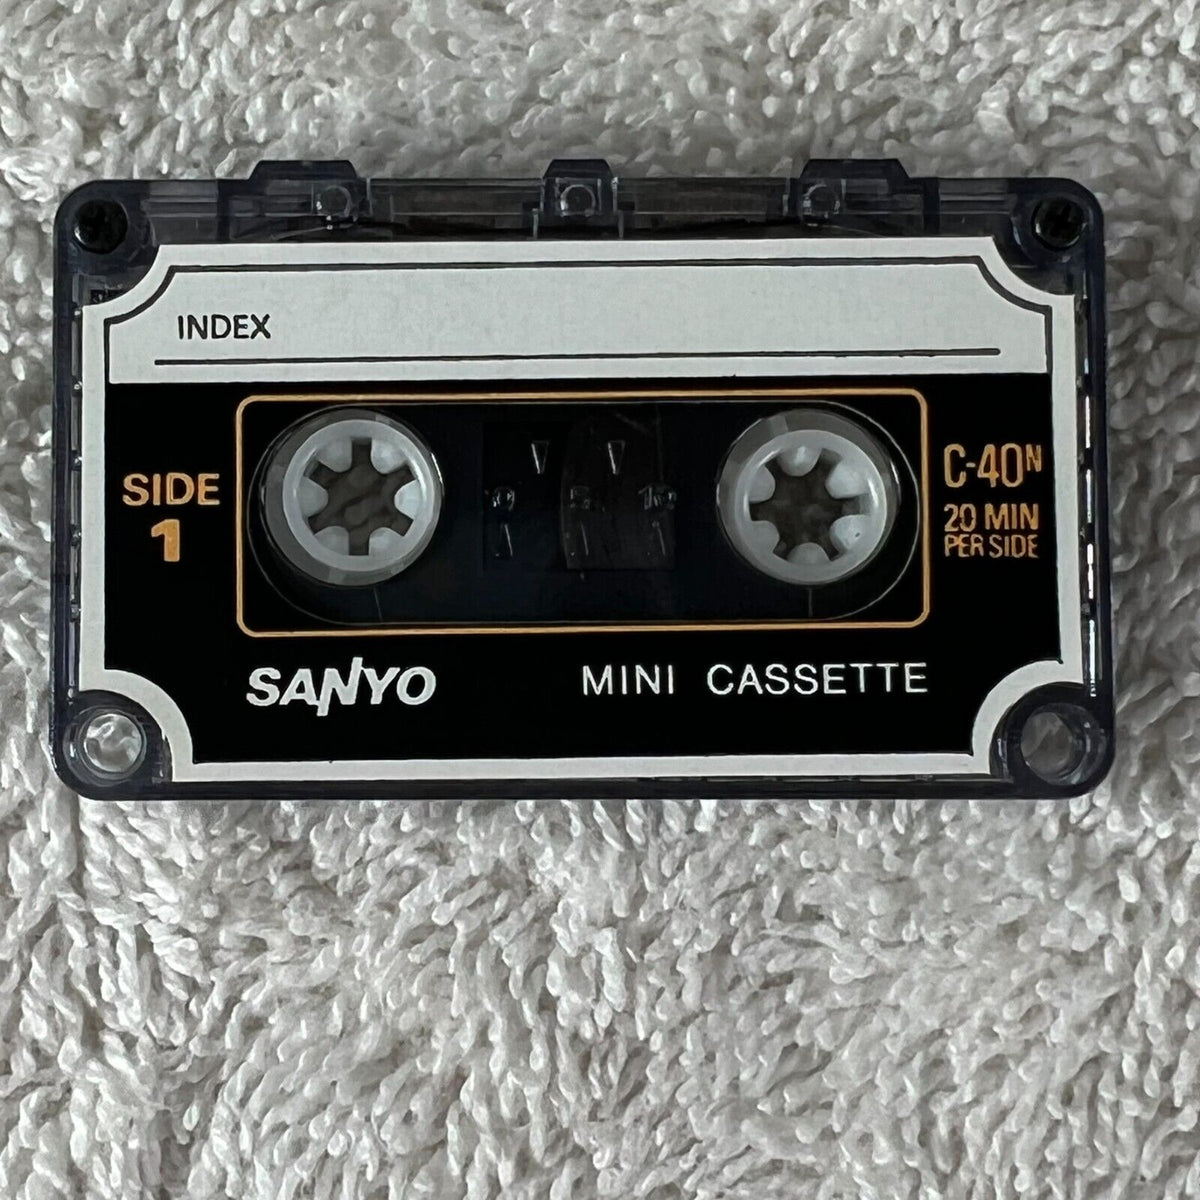 SANYO MINI CASSETTE TAPE Blank 40 Minute Double Sided C-40N - New Sealed